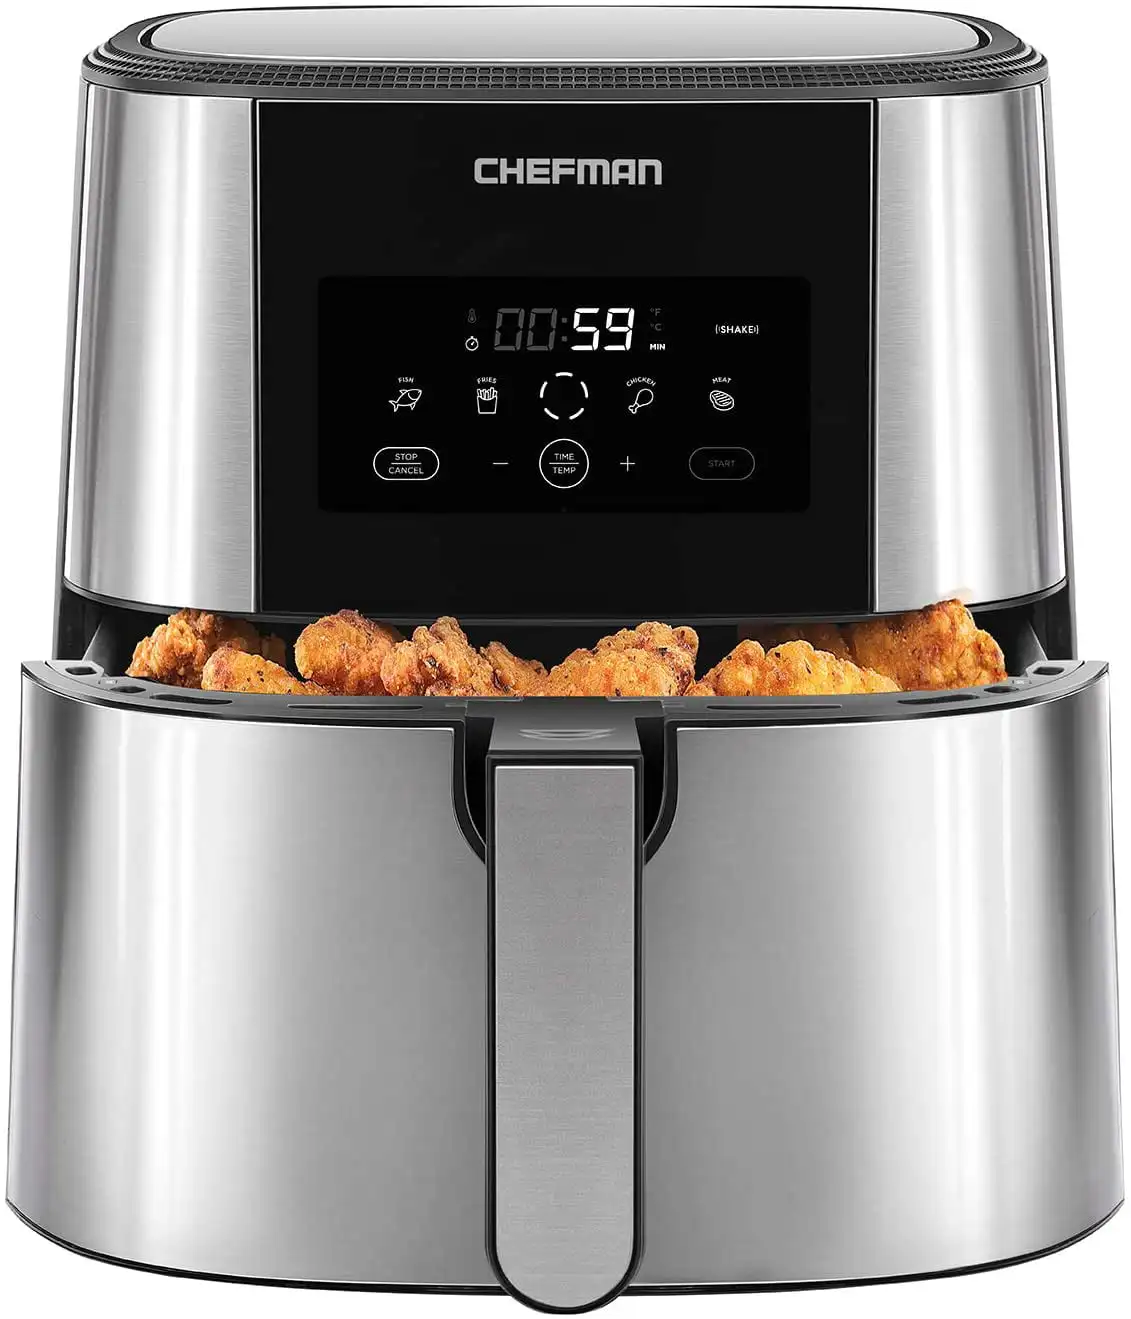 TurboFry Touch Digital Air Fryer, 5 Qt., Stainless Steel